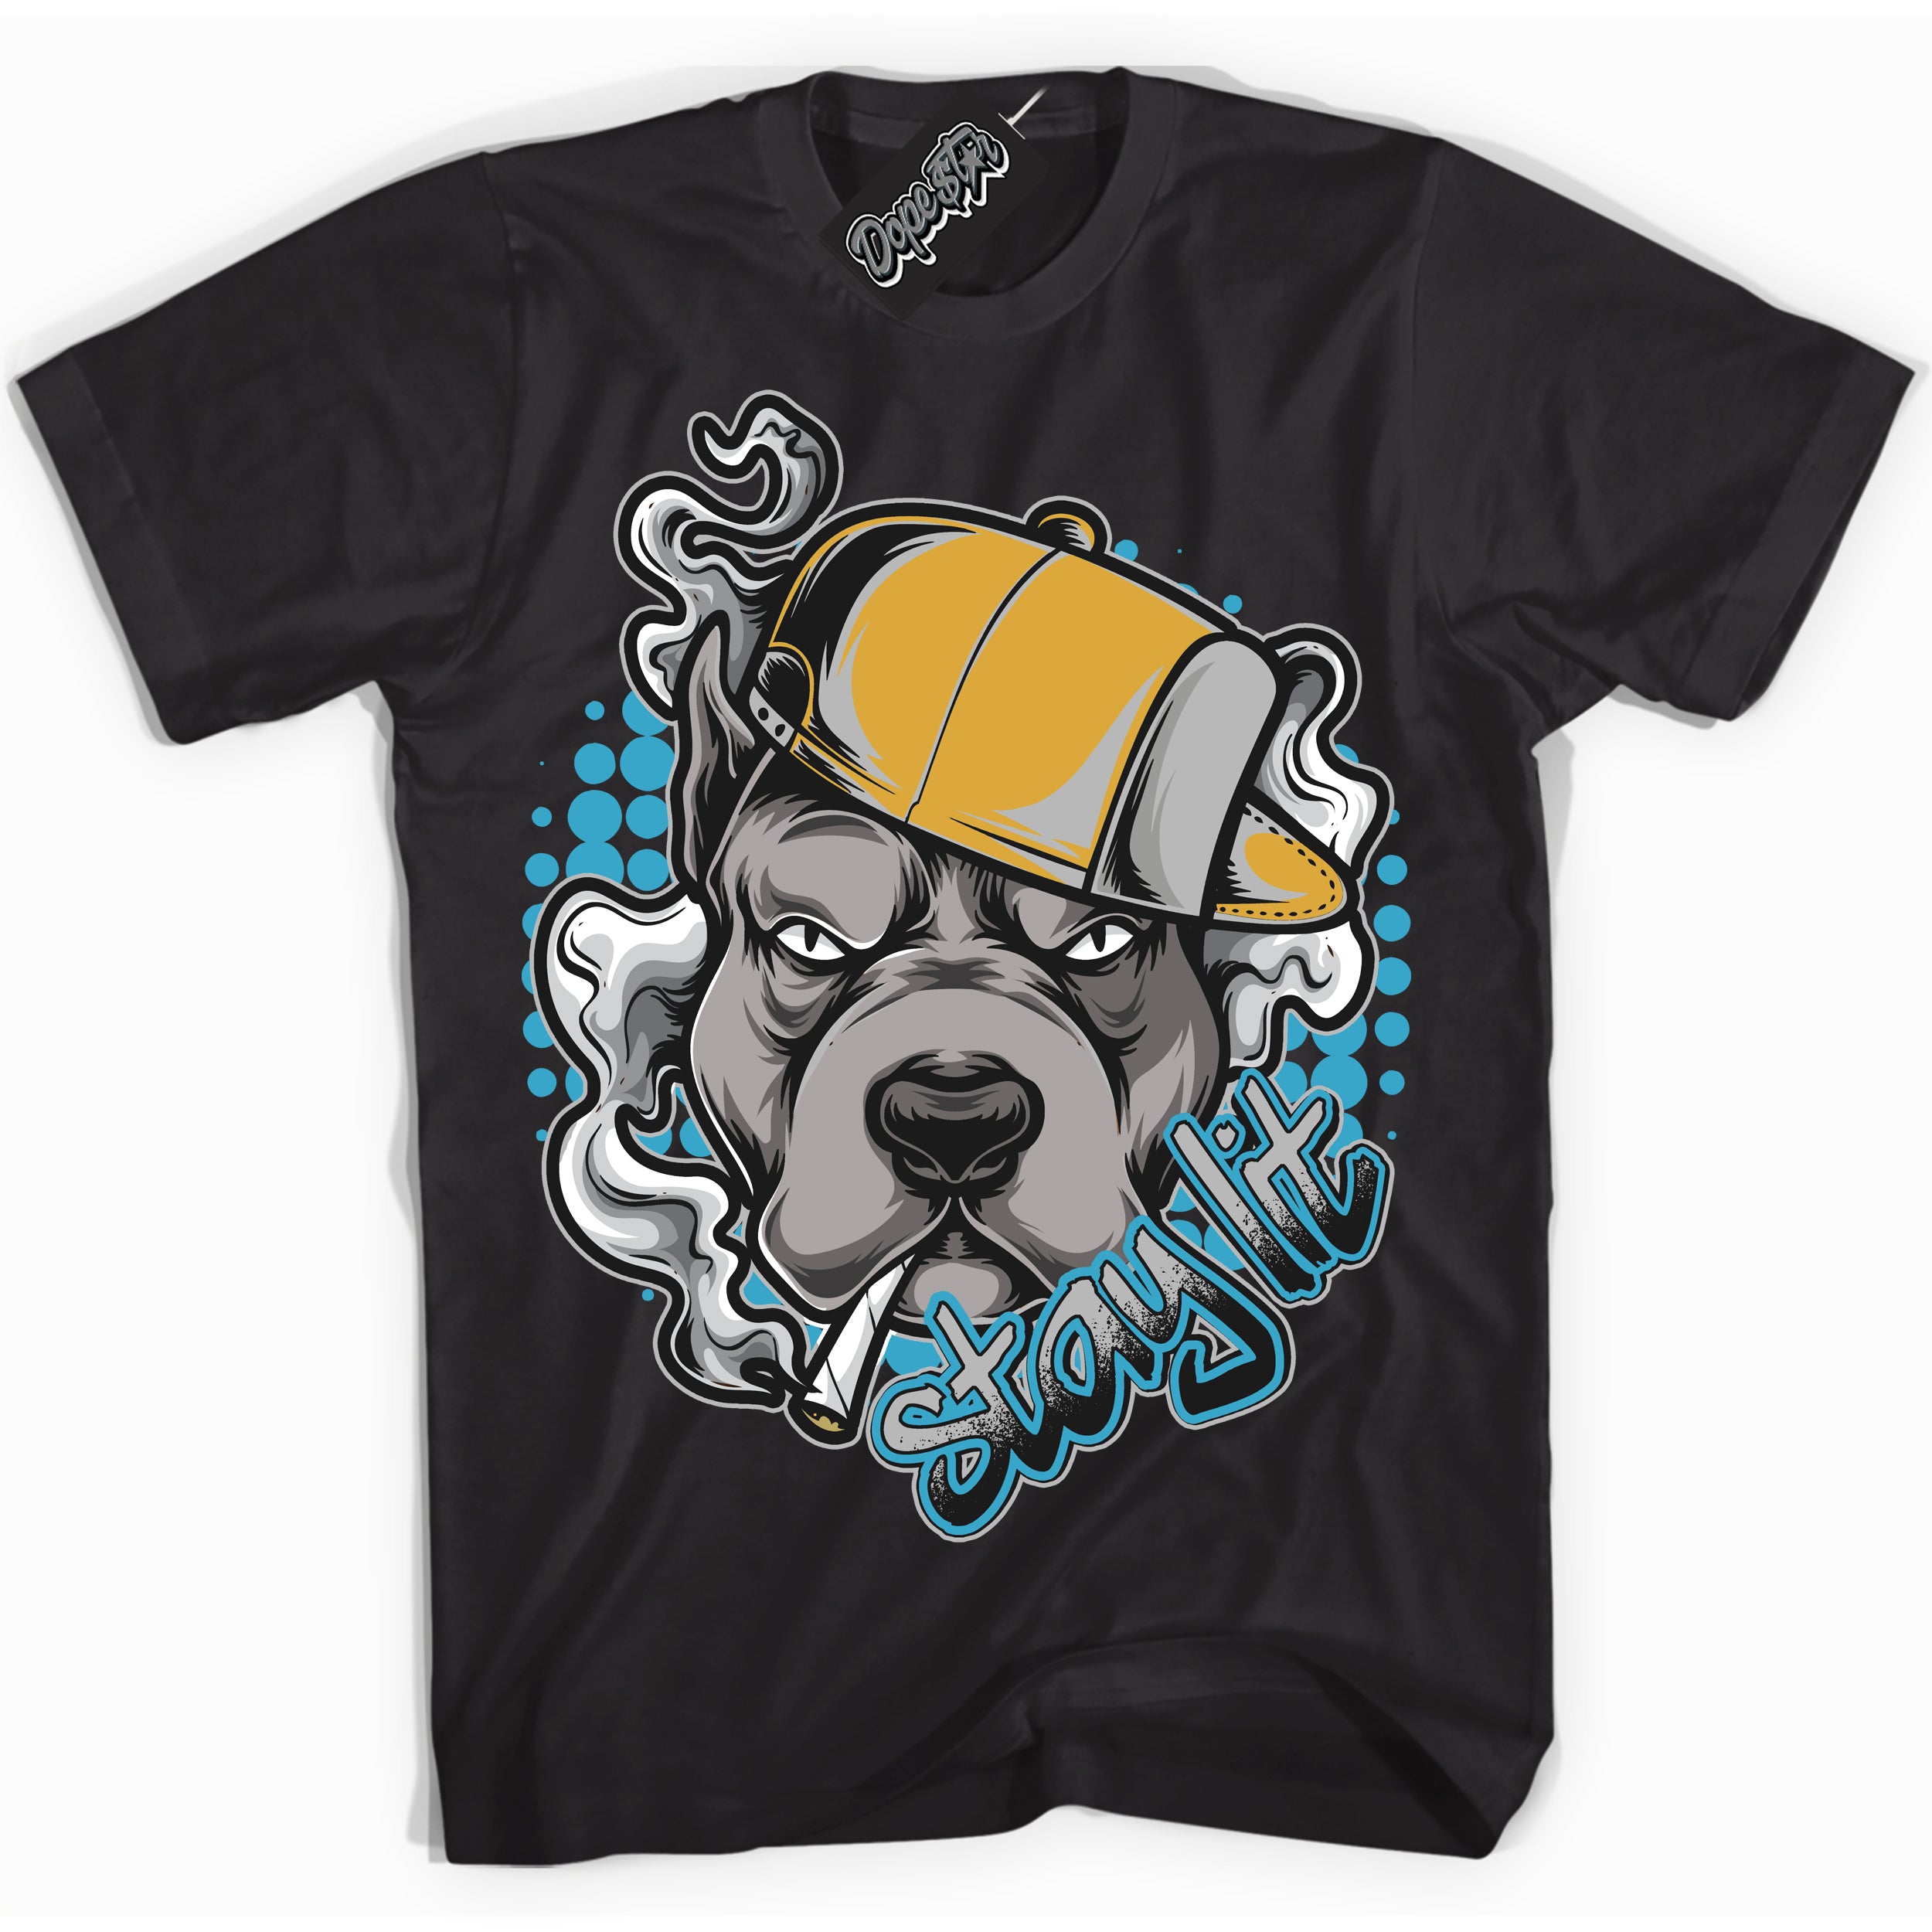 Cool Black graphic tee with “ Stay Lit ” print, that perfectly matches Air Jordan 5 Aqua sneakers 